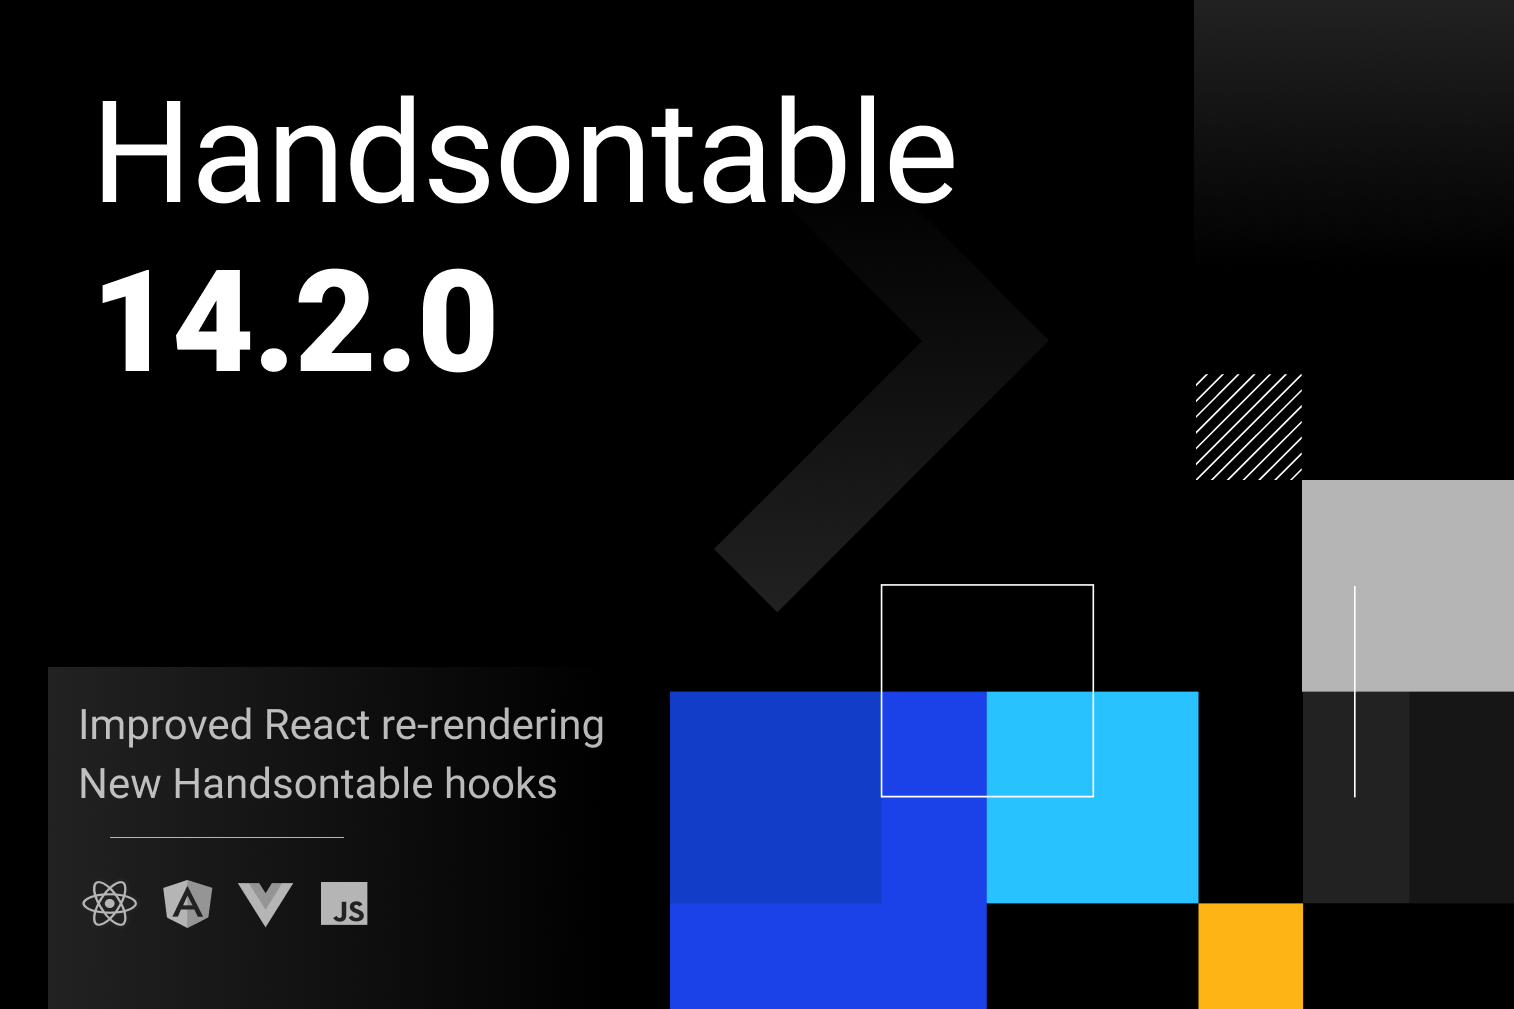 Handsontable 14.2.0: Improved React re-rendering and new Handsontable hooks